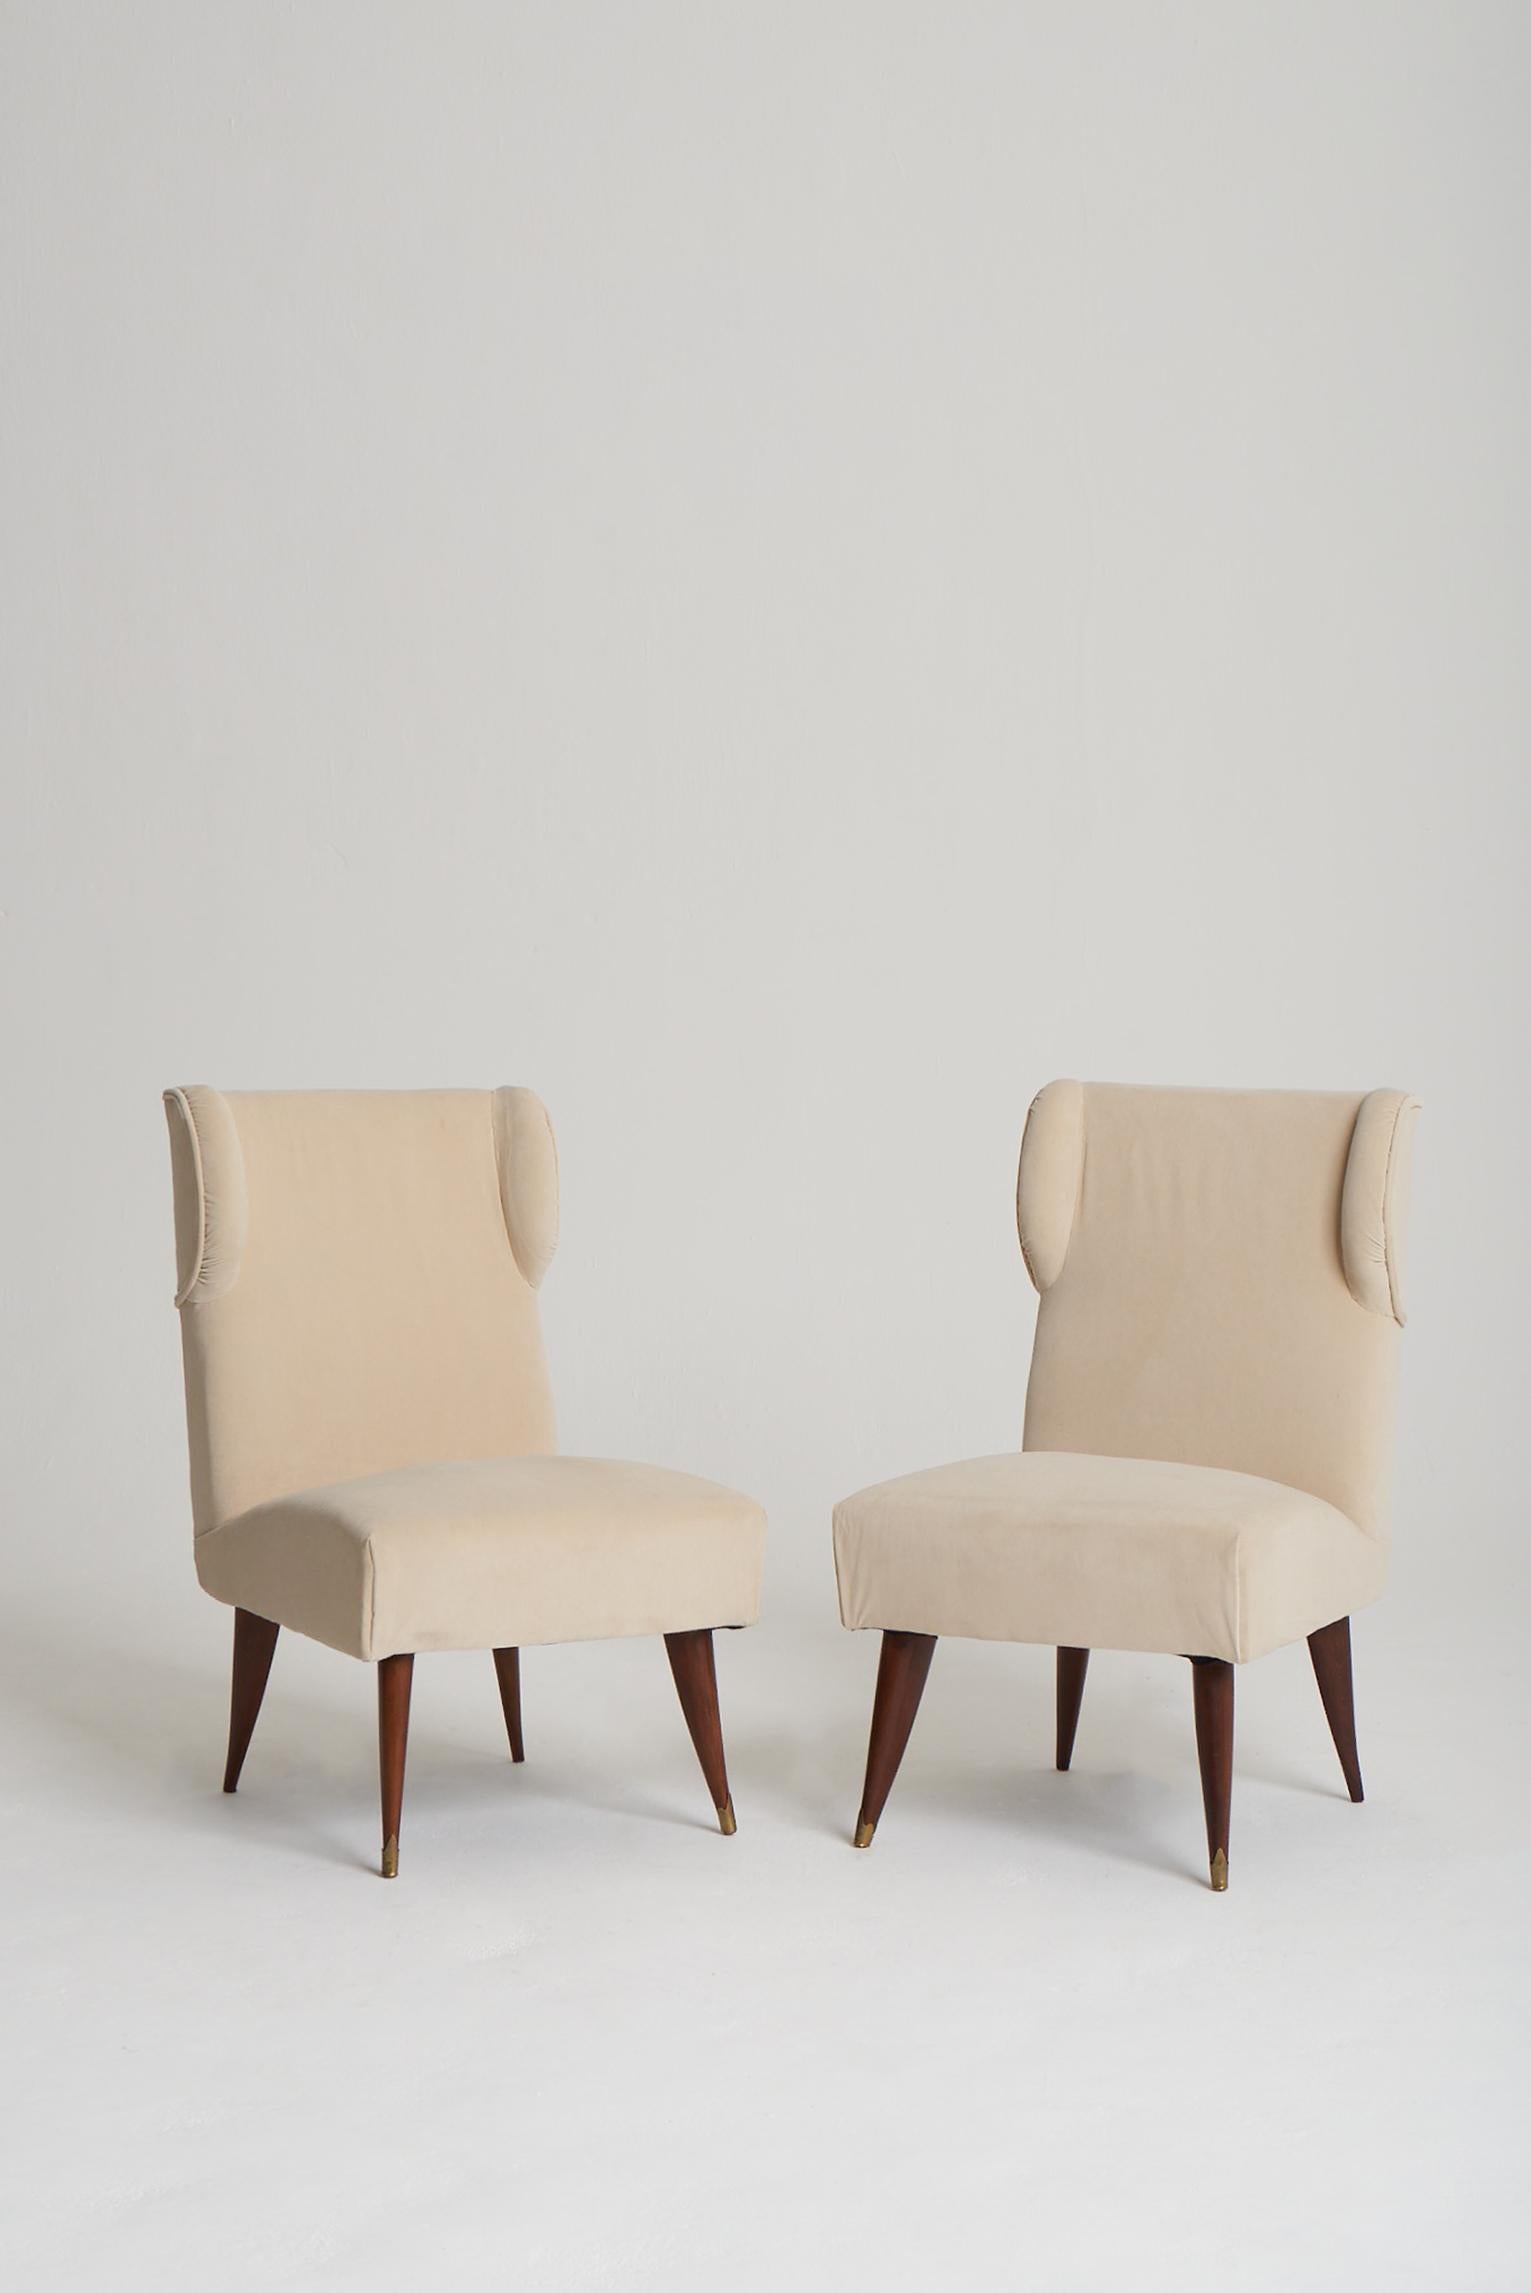 A pair of brass mounted beech and velvet slipper chairs, attributed to Paolo Buffa (1903-1970).
Italy, Circa 1940.